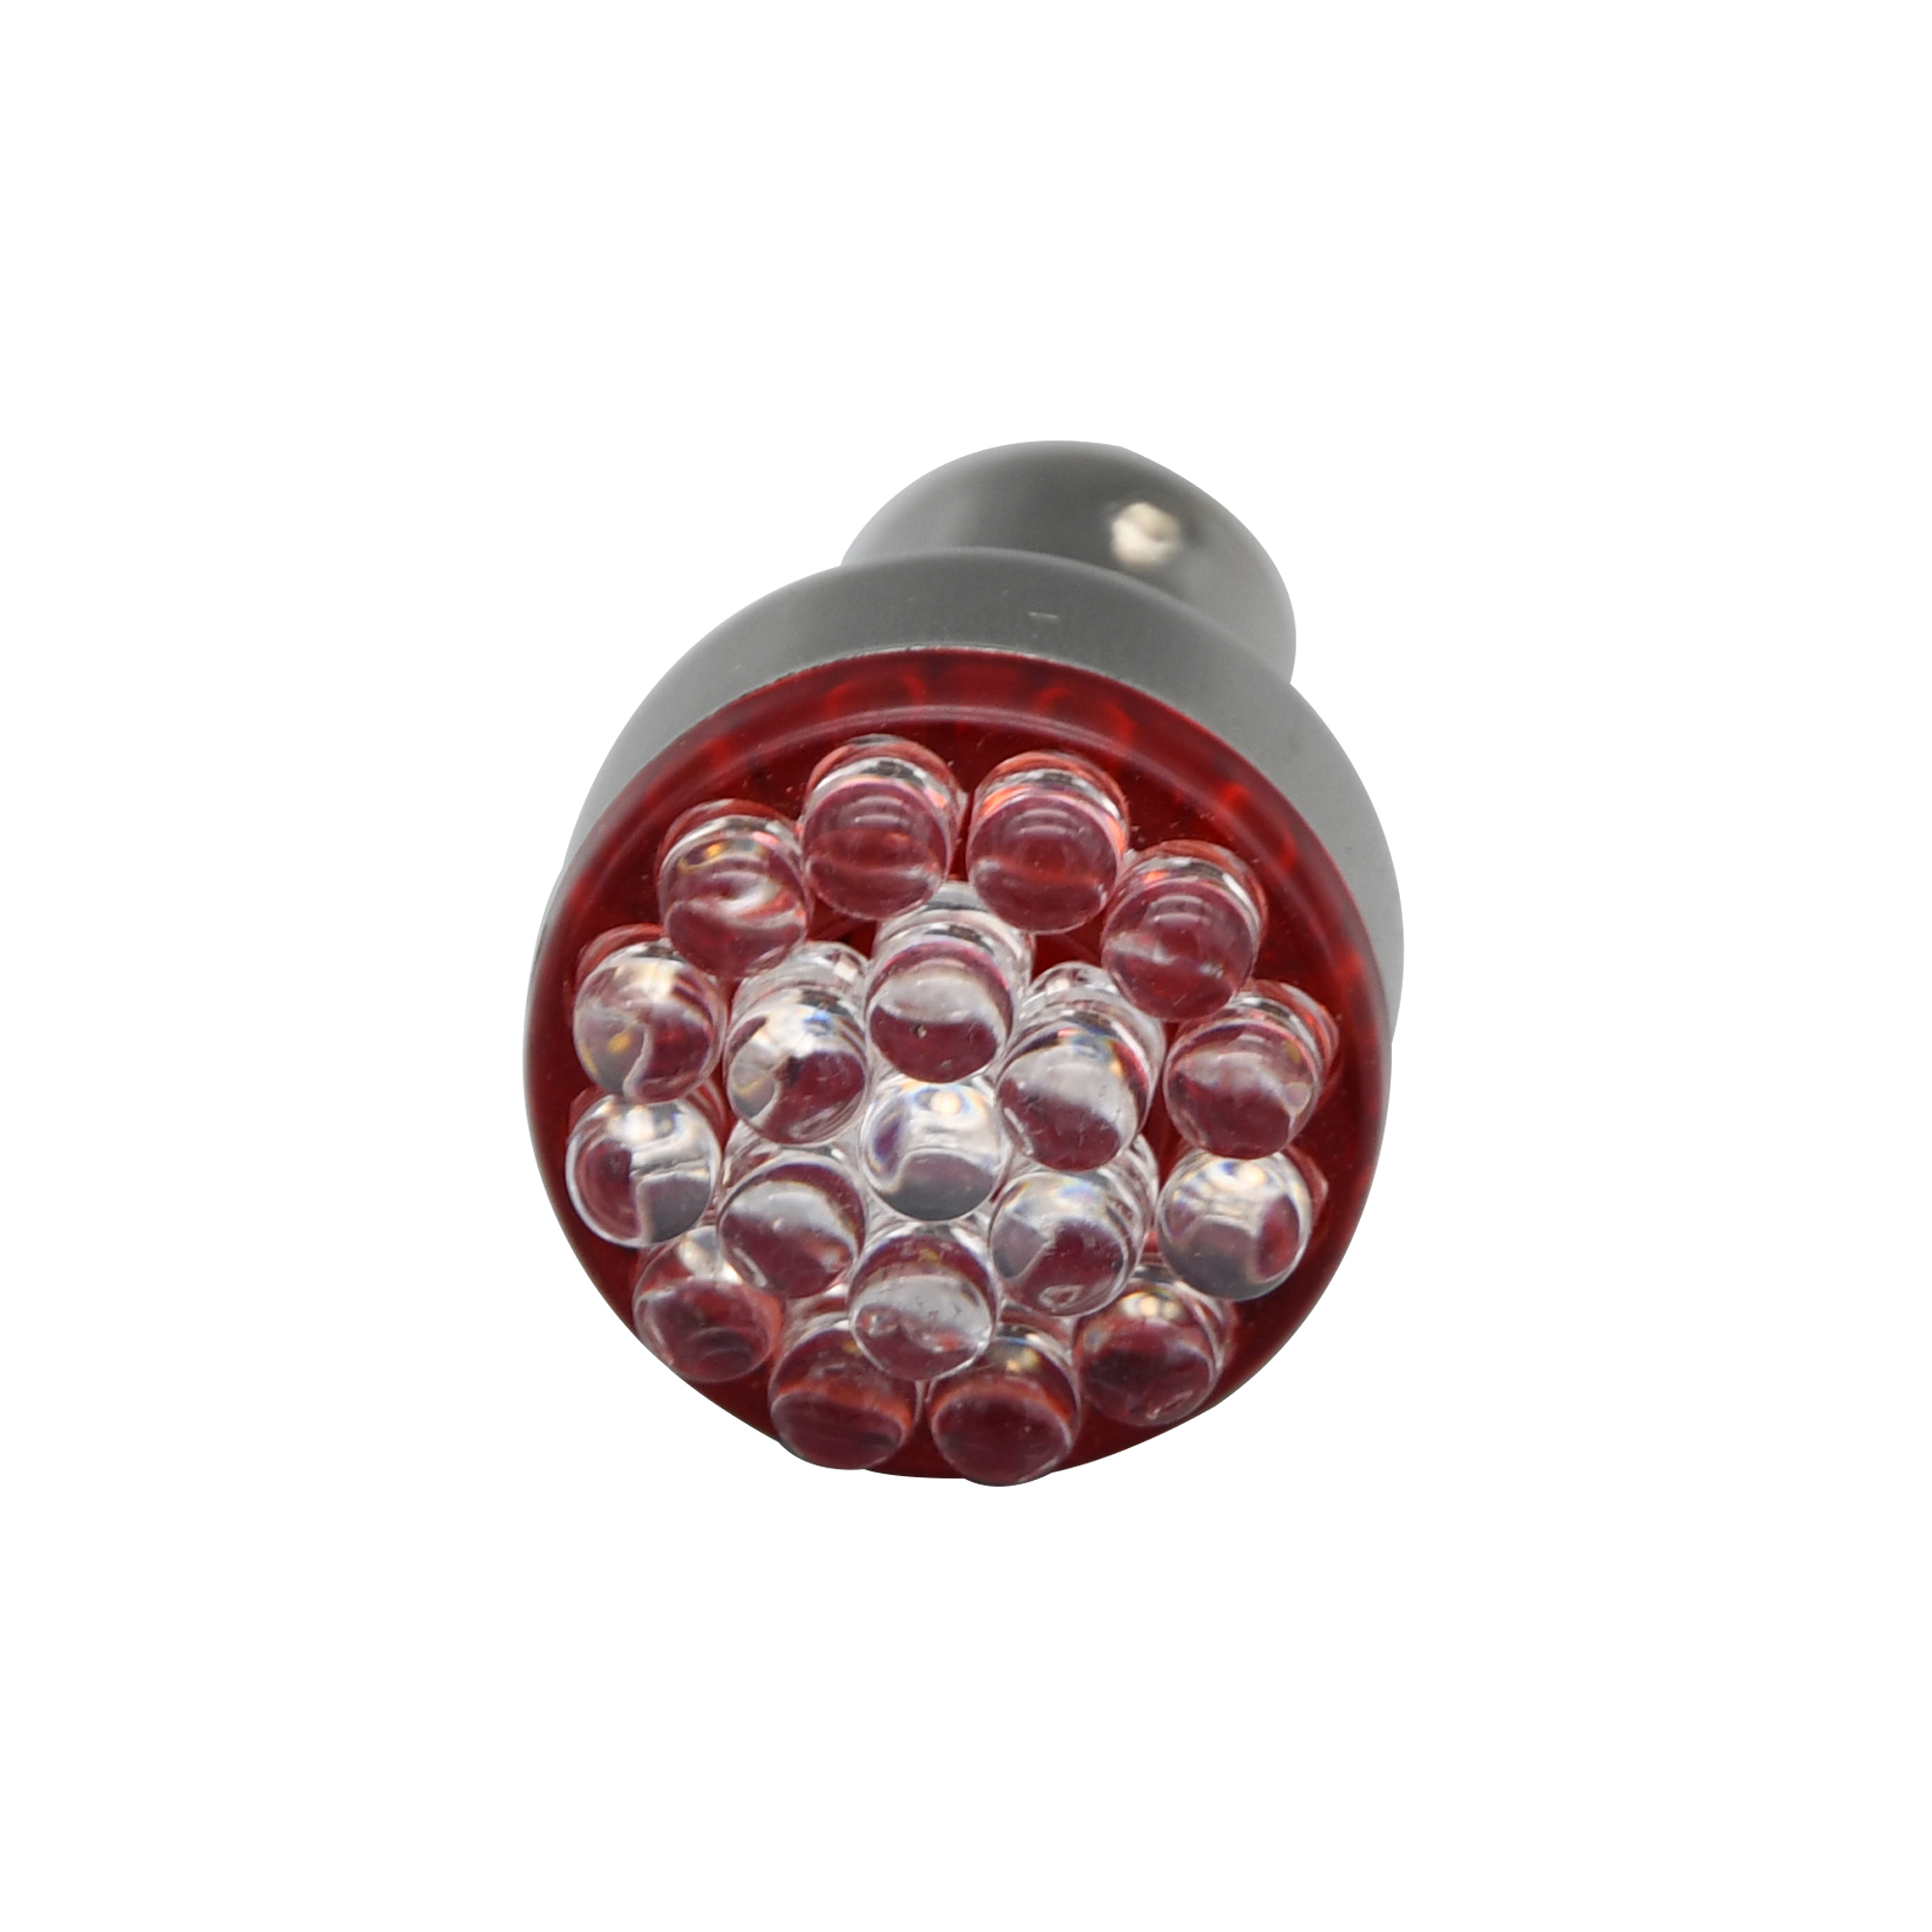 slepen Woordvoerder Vormen BIKE IT 12V Red LED Bulb BAY15D :: £14.39 :: Motorcycle Parts :: BULBS ::  WHATEVERWHEELS LTD - ATV, Motorbike & Scooter Centre - Lancashire's Best  For Quad, Buggy, 50cc & 125cc Motorcycle and Moped Sale